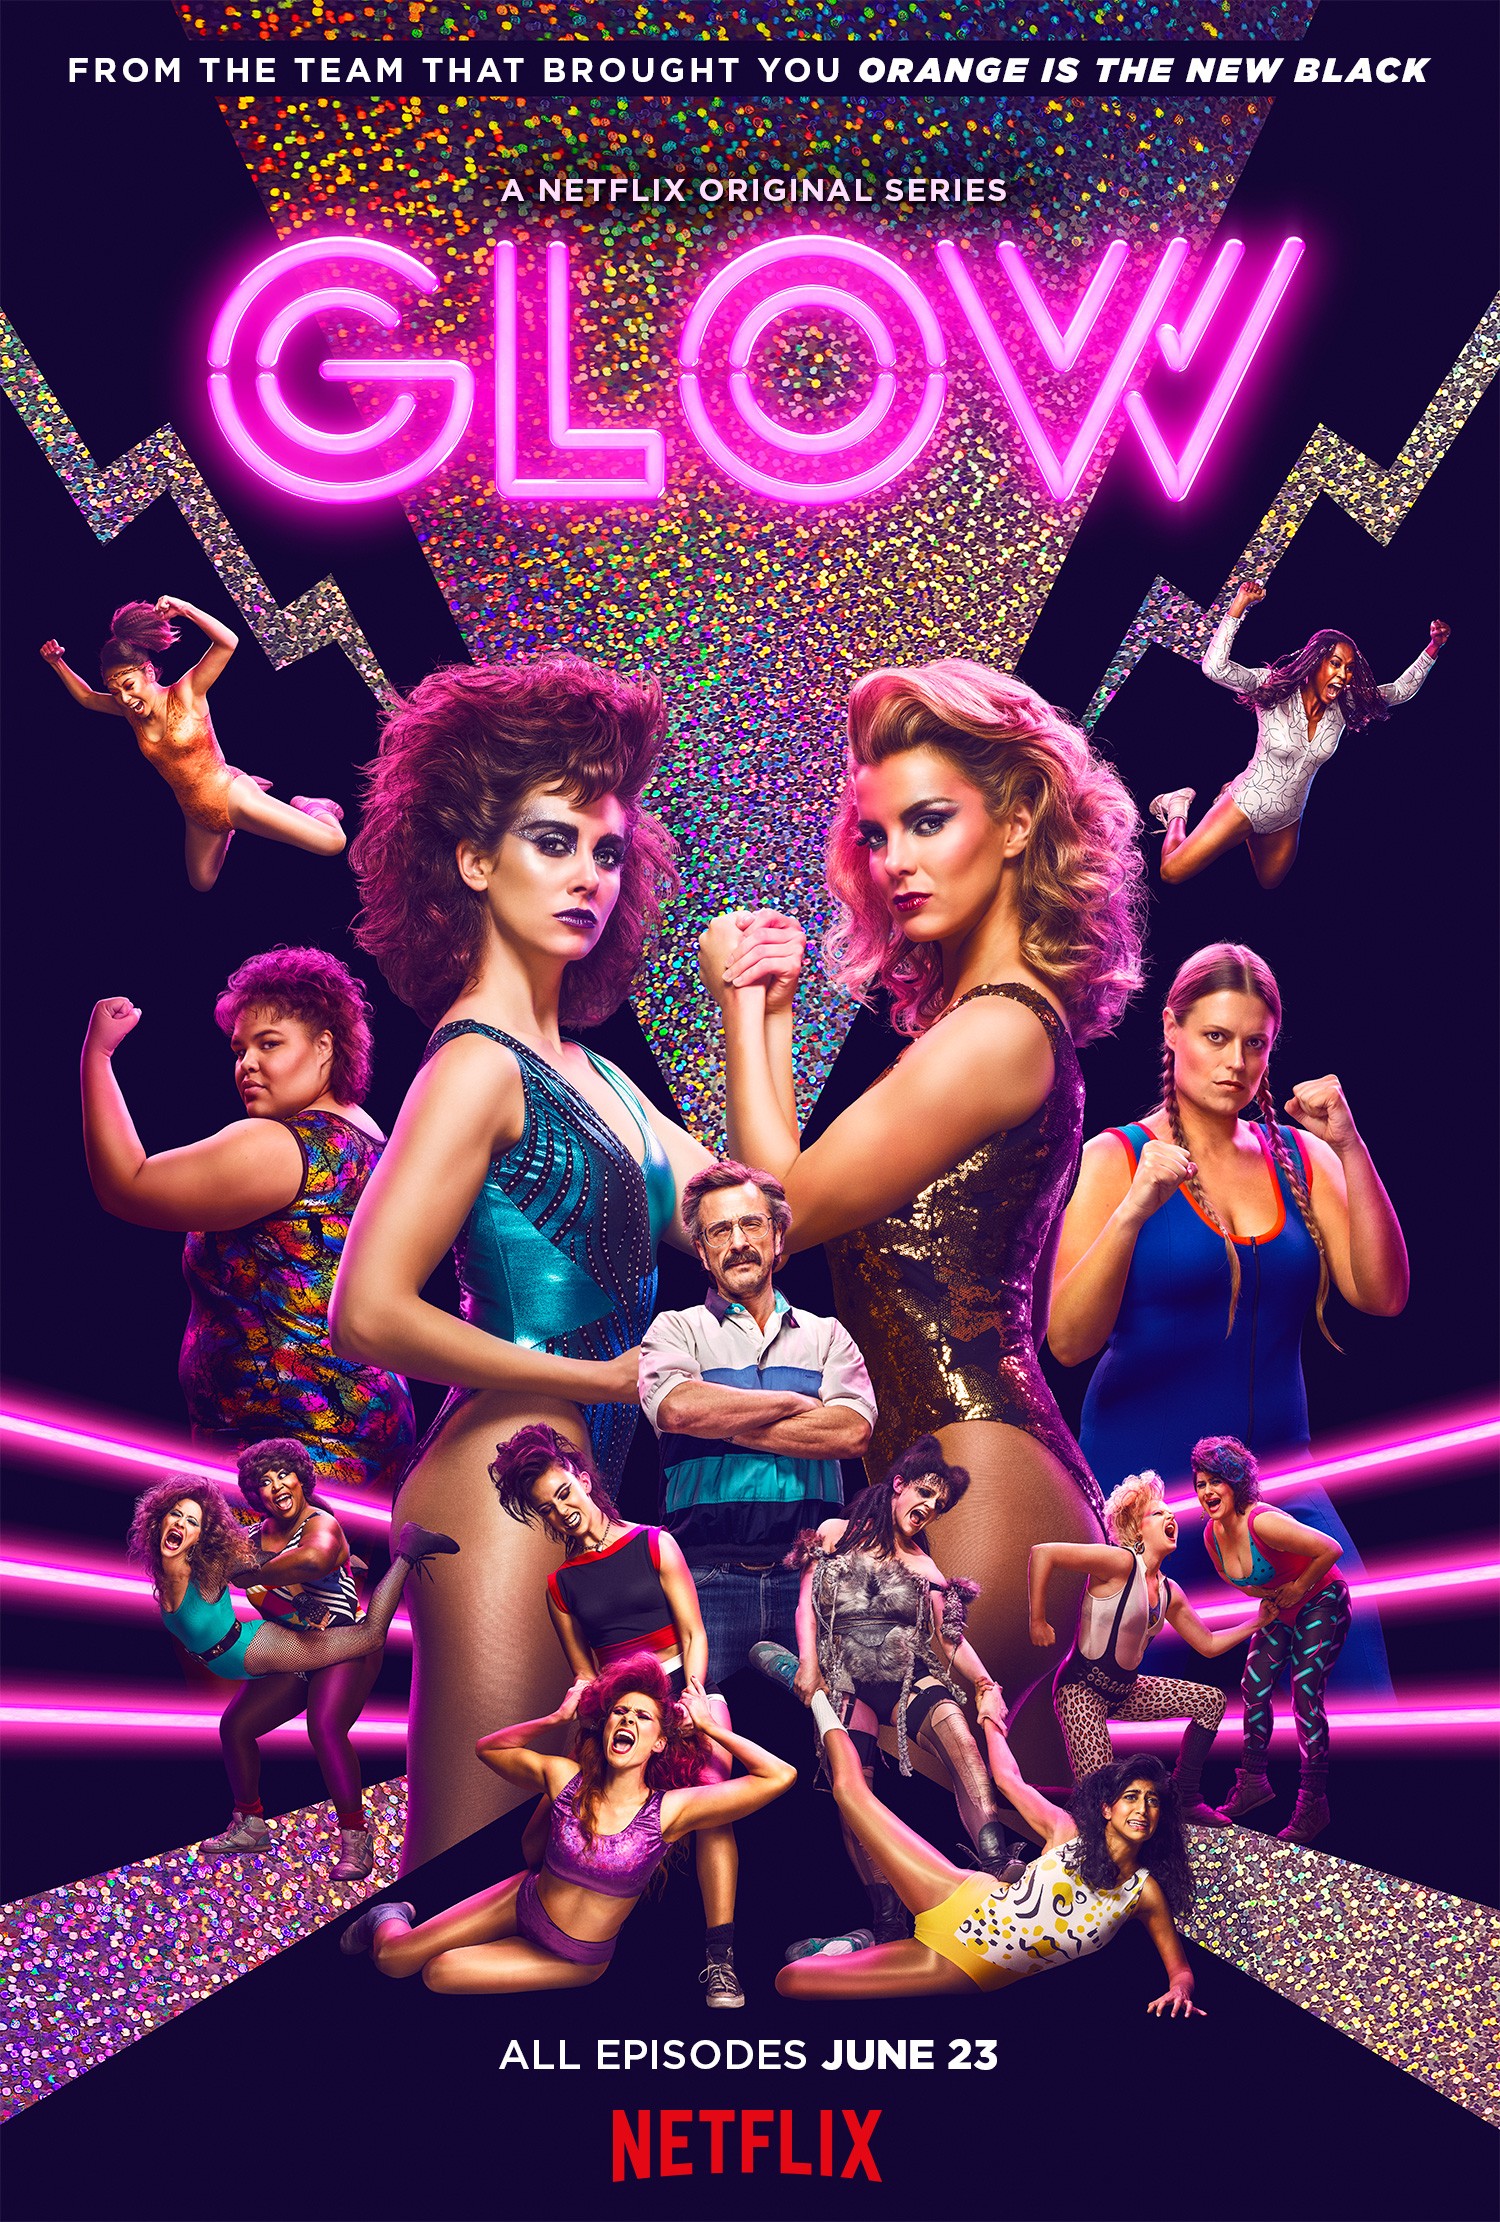 GLOW's Hairstylists Don't Use Wigs to Create the Show's '80s Looks